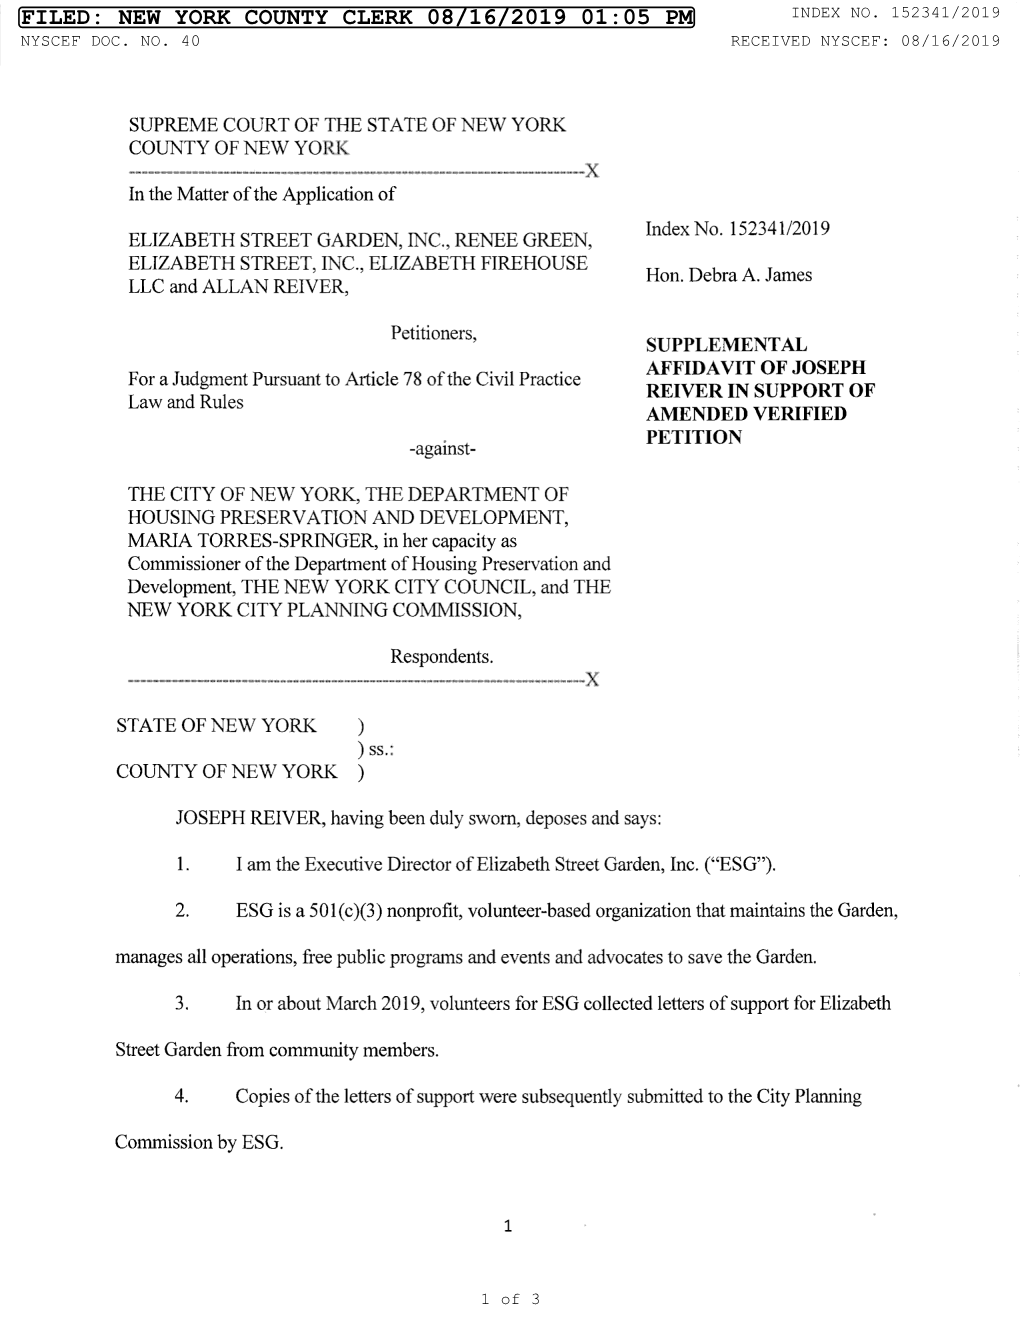 Filed: New York County Clerk 08/16/2019 01:05 Pm Index No